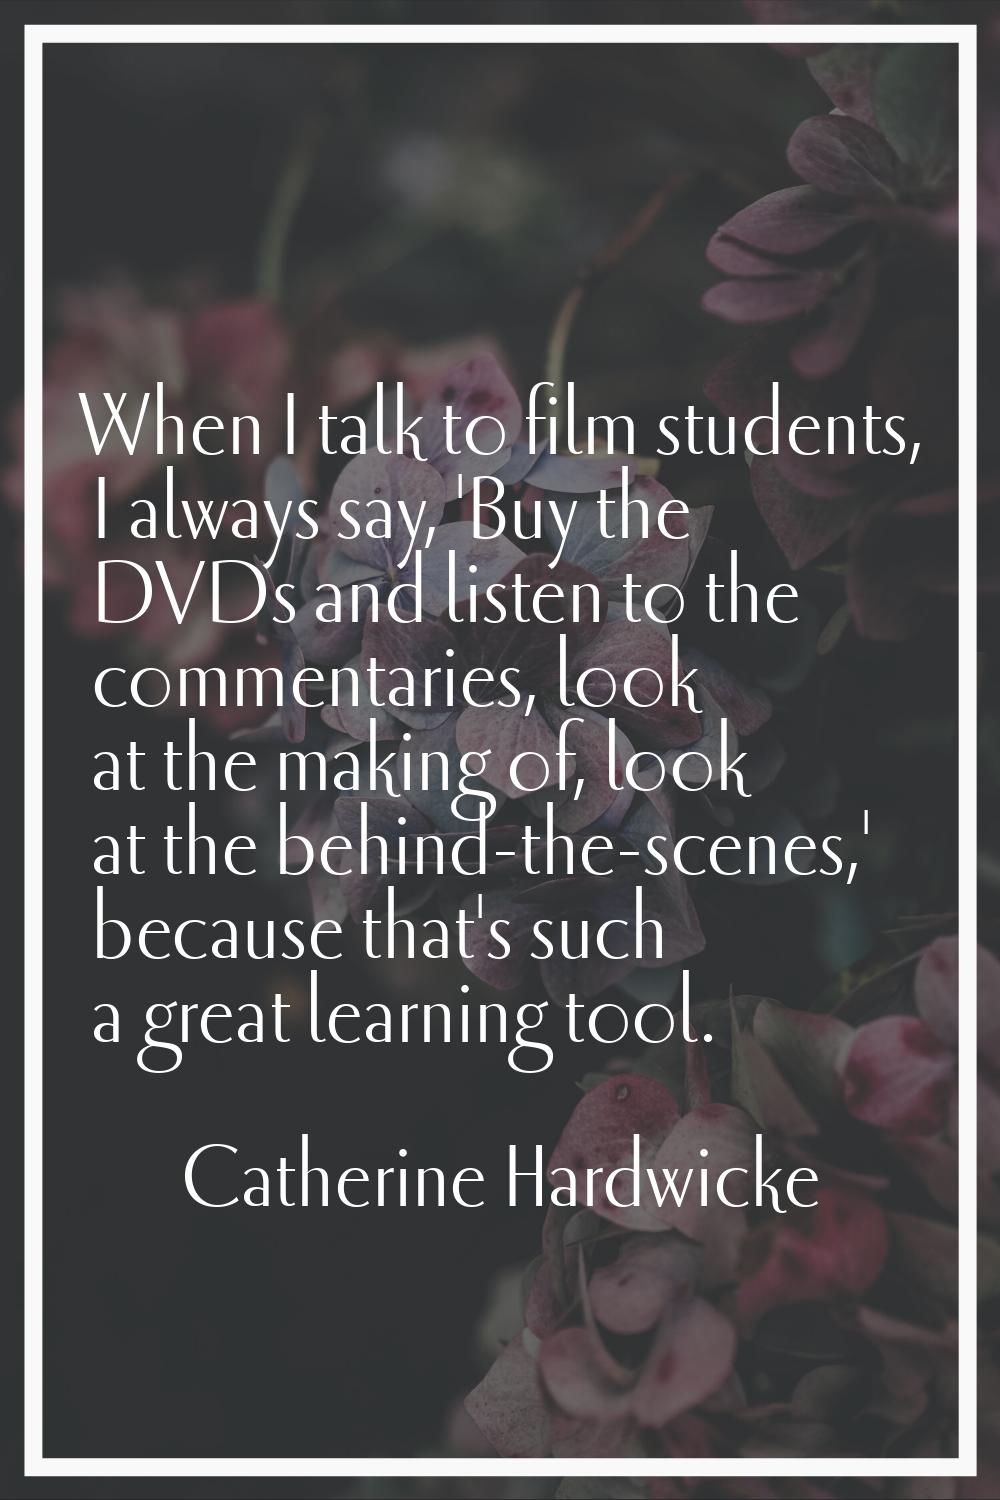 When I talk to film students, I always say, 'Buy the DVDs and listen to the commentaries, look at t